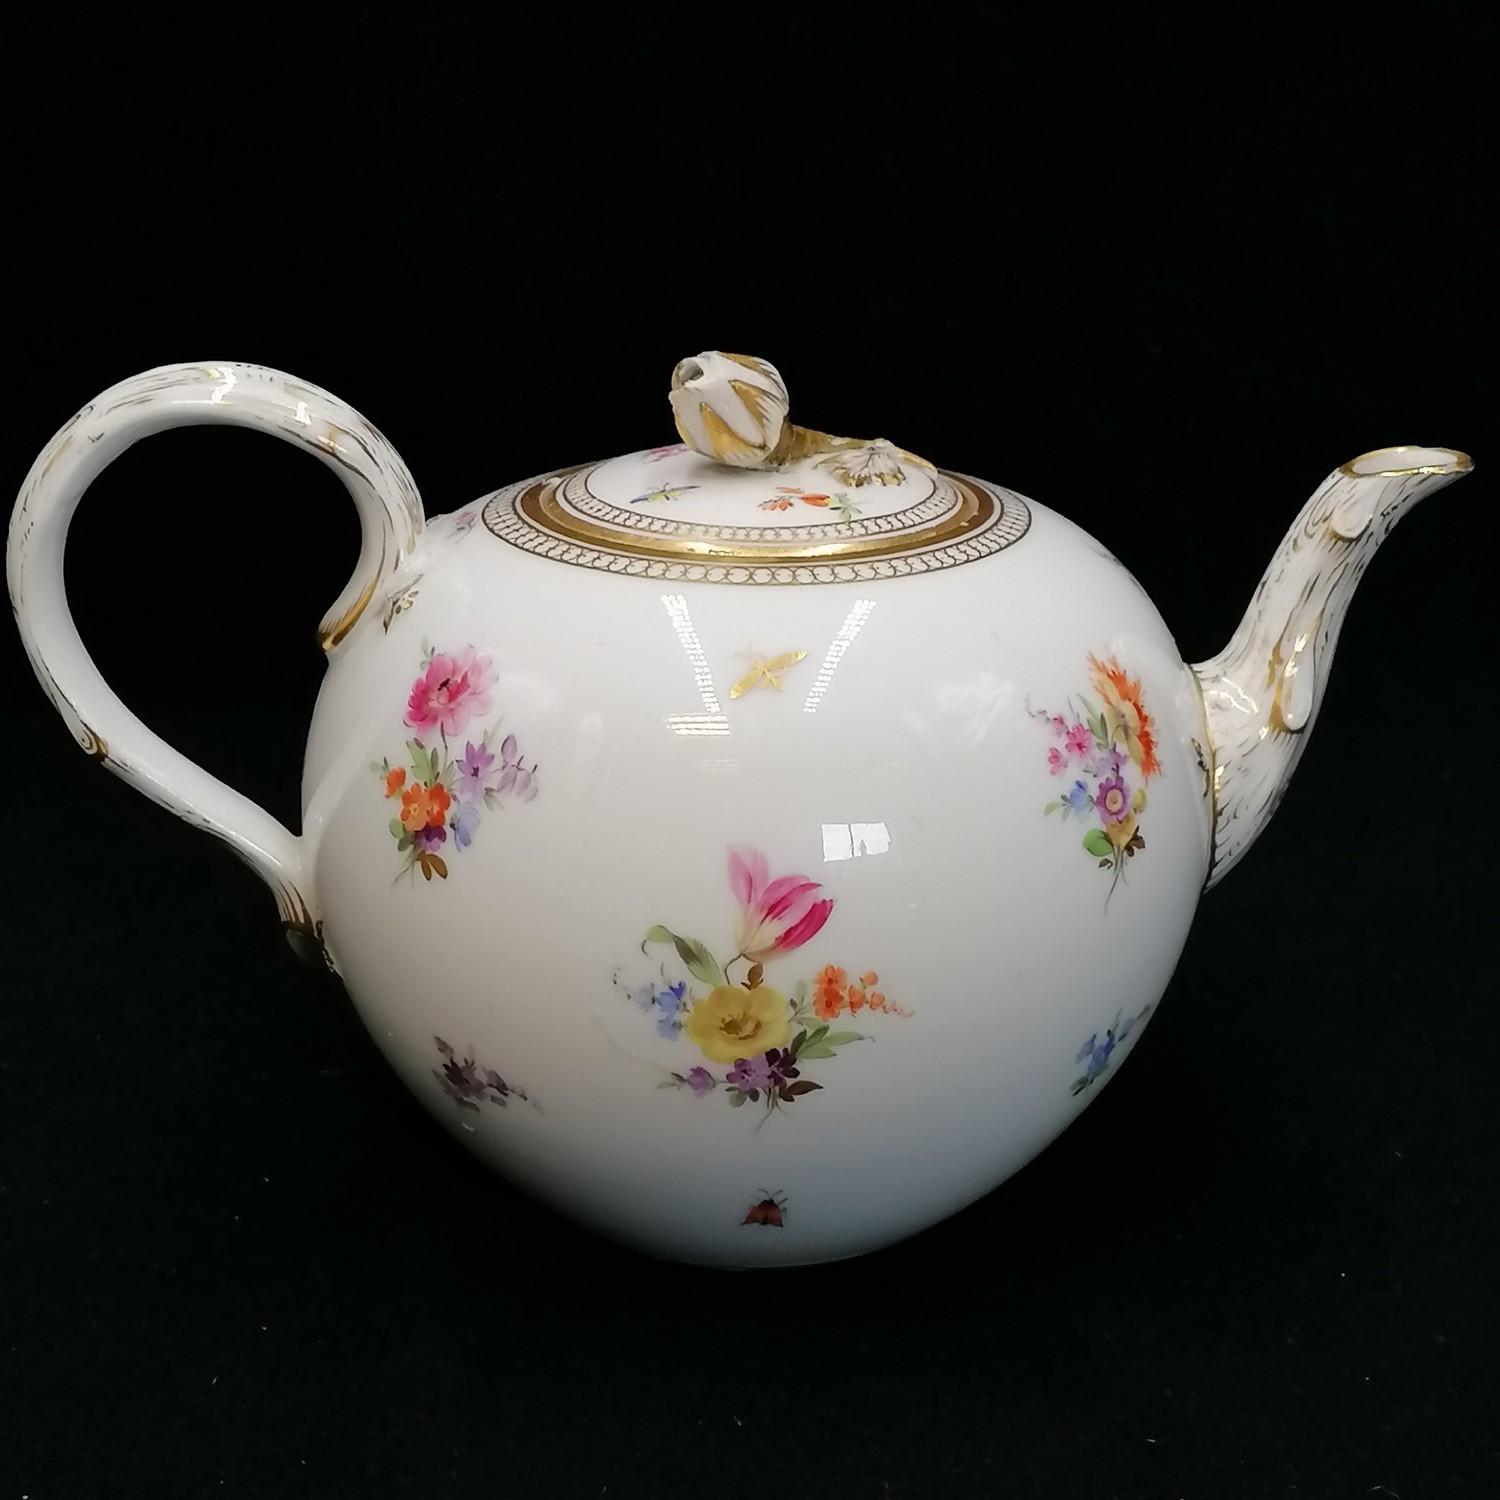 Antique Meissen marked hand decorated teapot with flower & bug decoration - small chip & rub to - Image 6 of 6